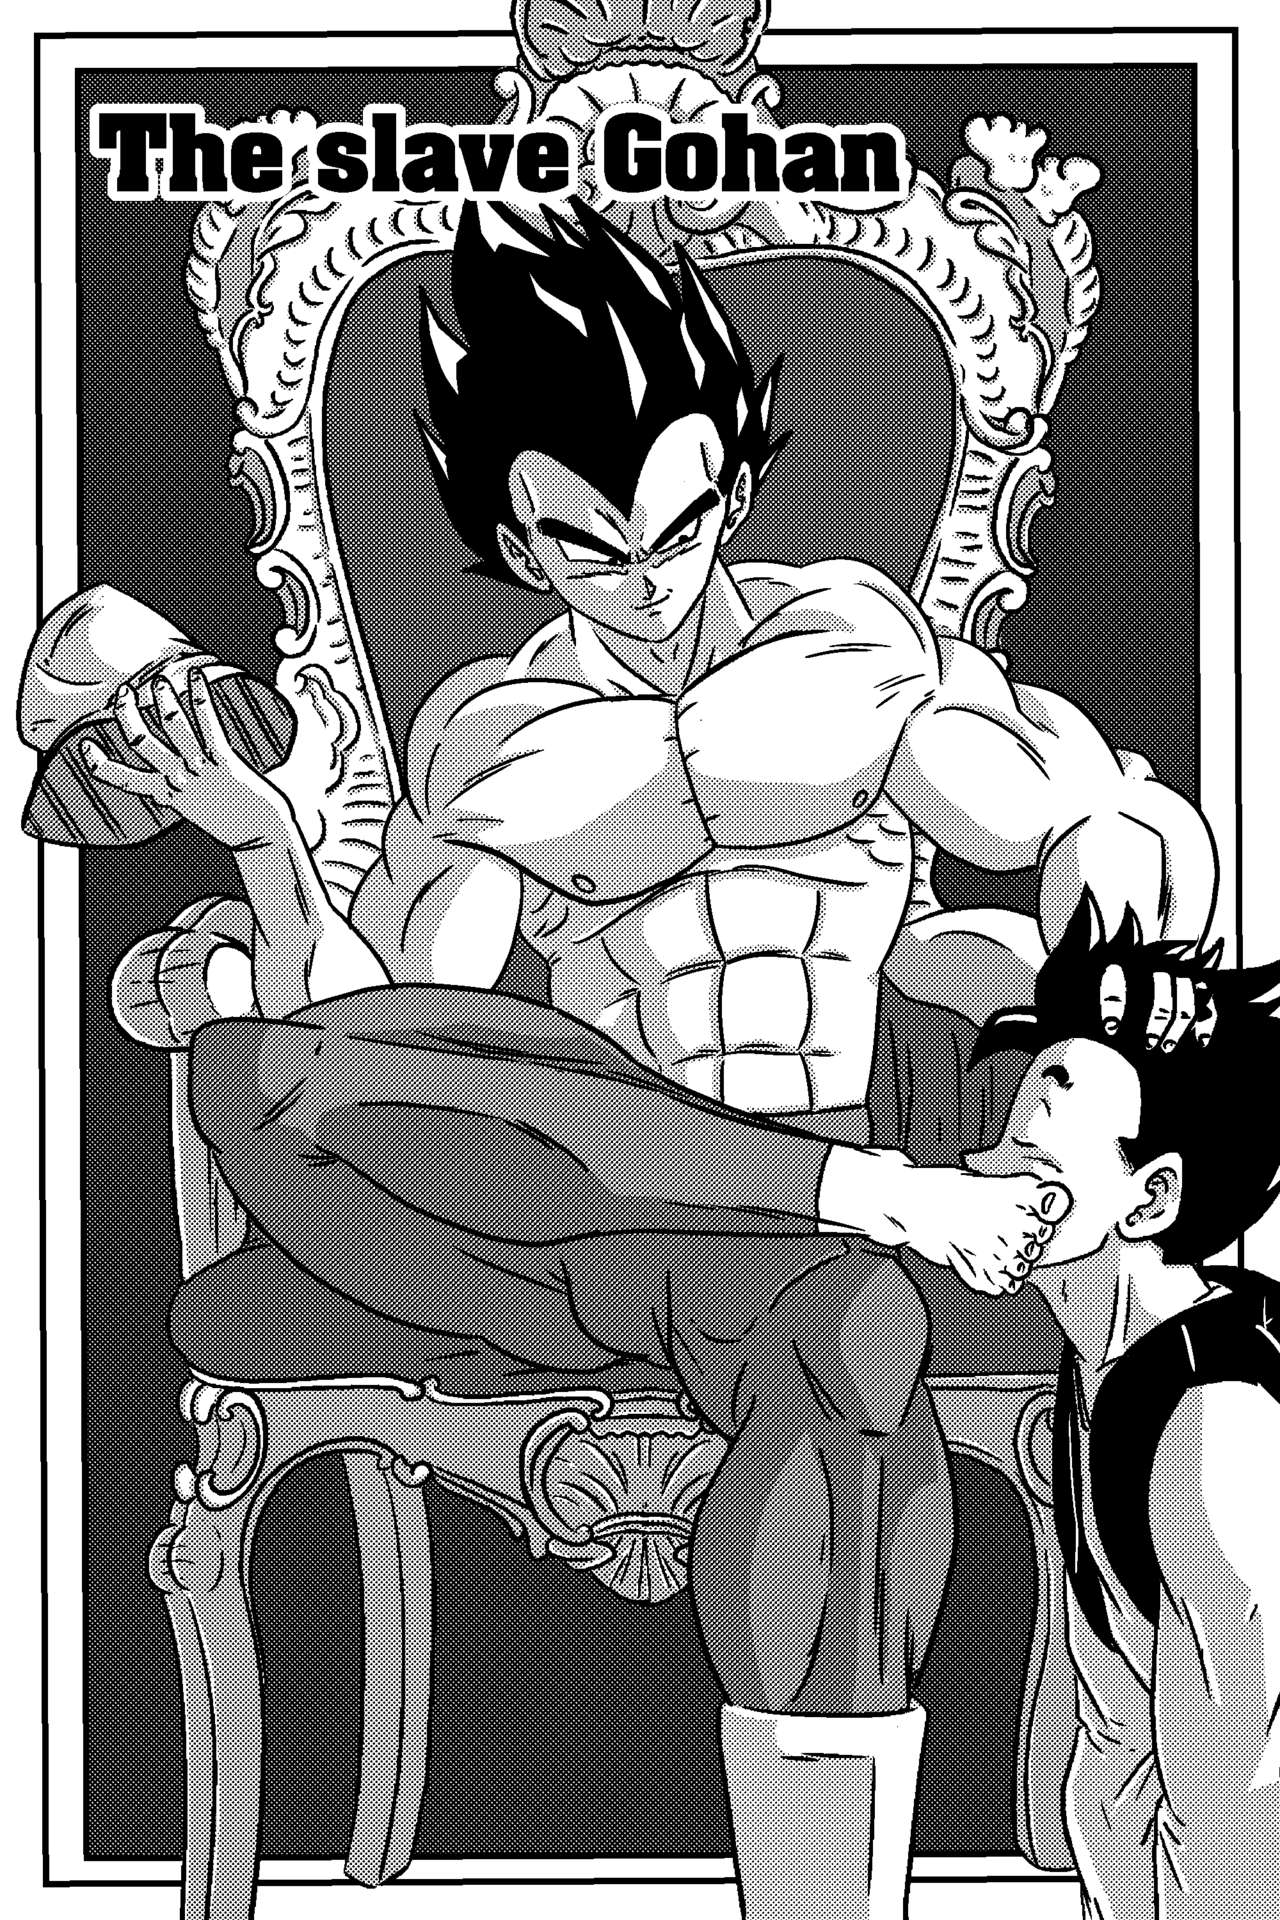 1700675 main vegeta the paradise in his feet chapter 3 by supervegeta555 ddvu3nz